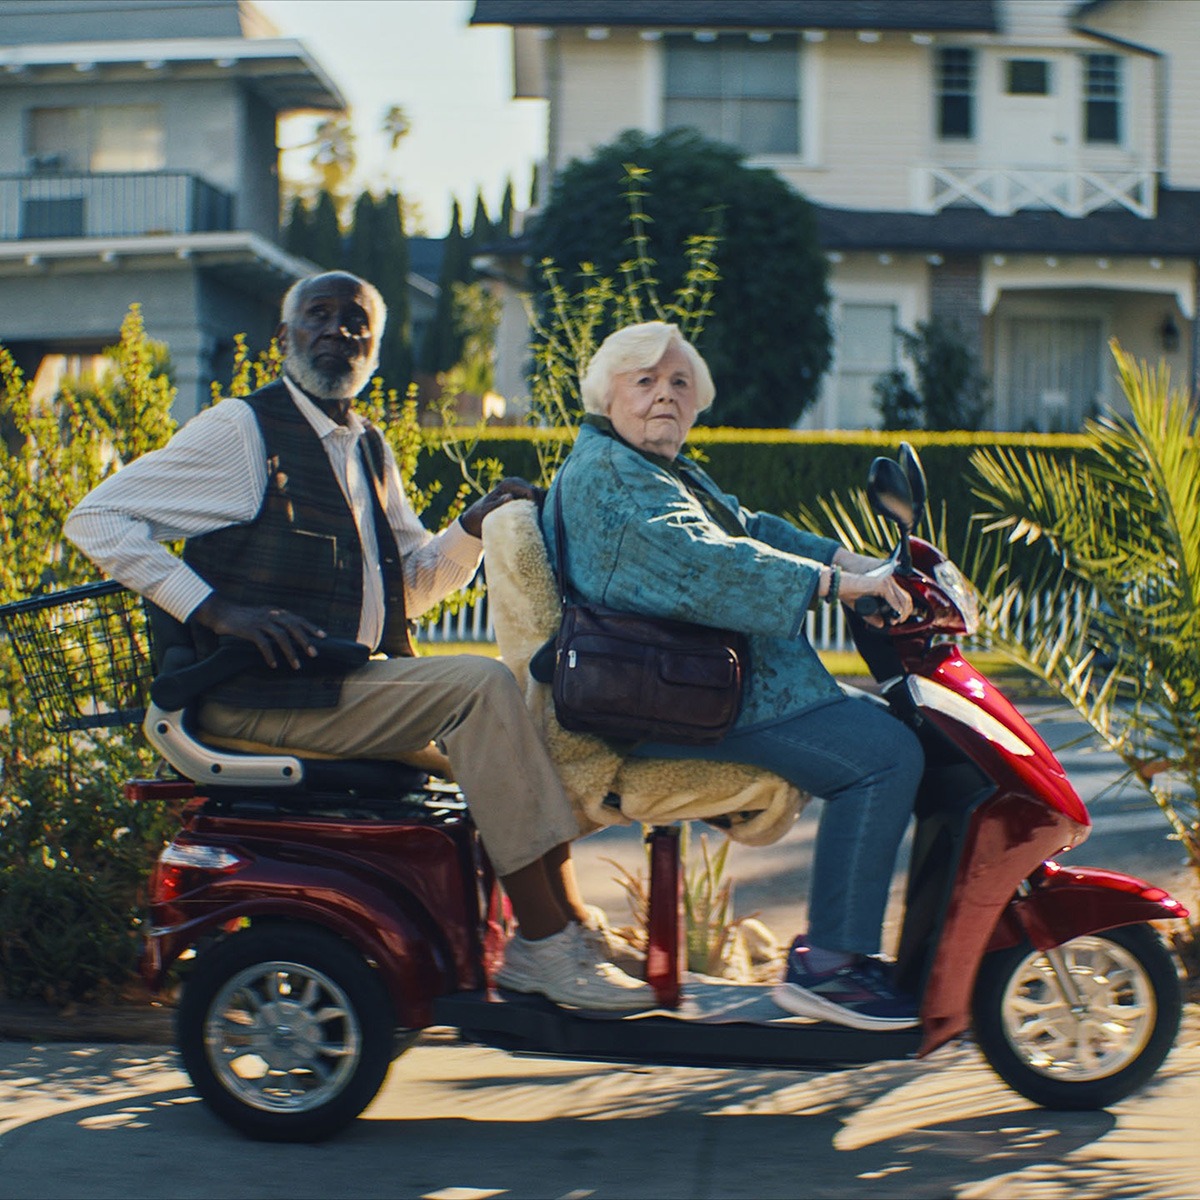 A man and woman on a scooter.